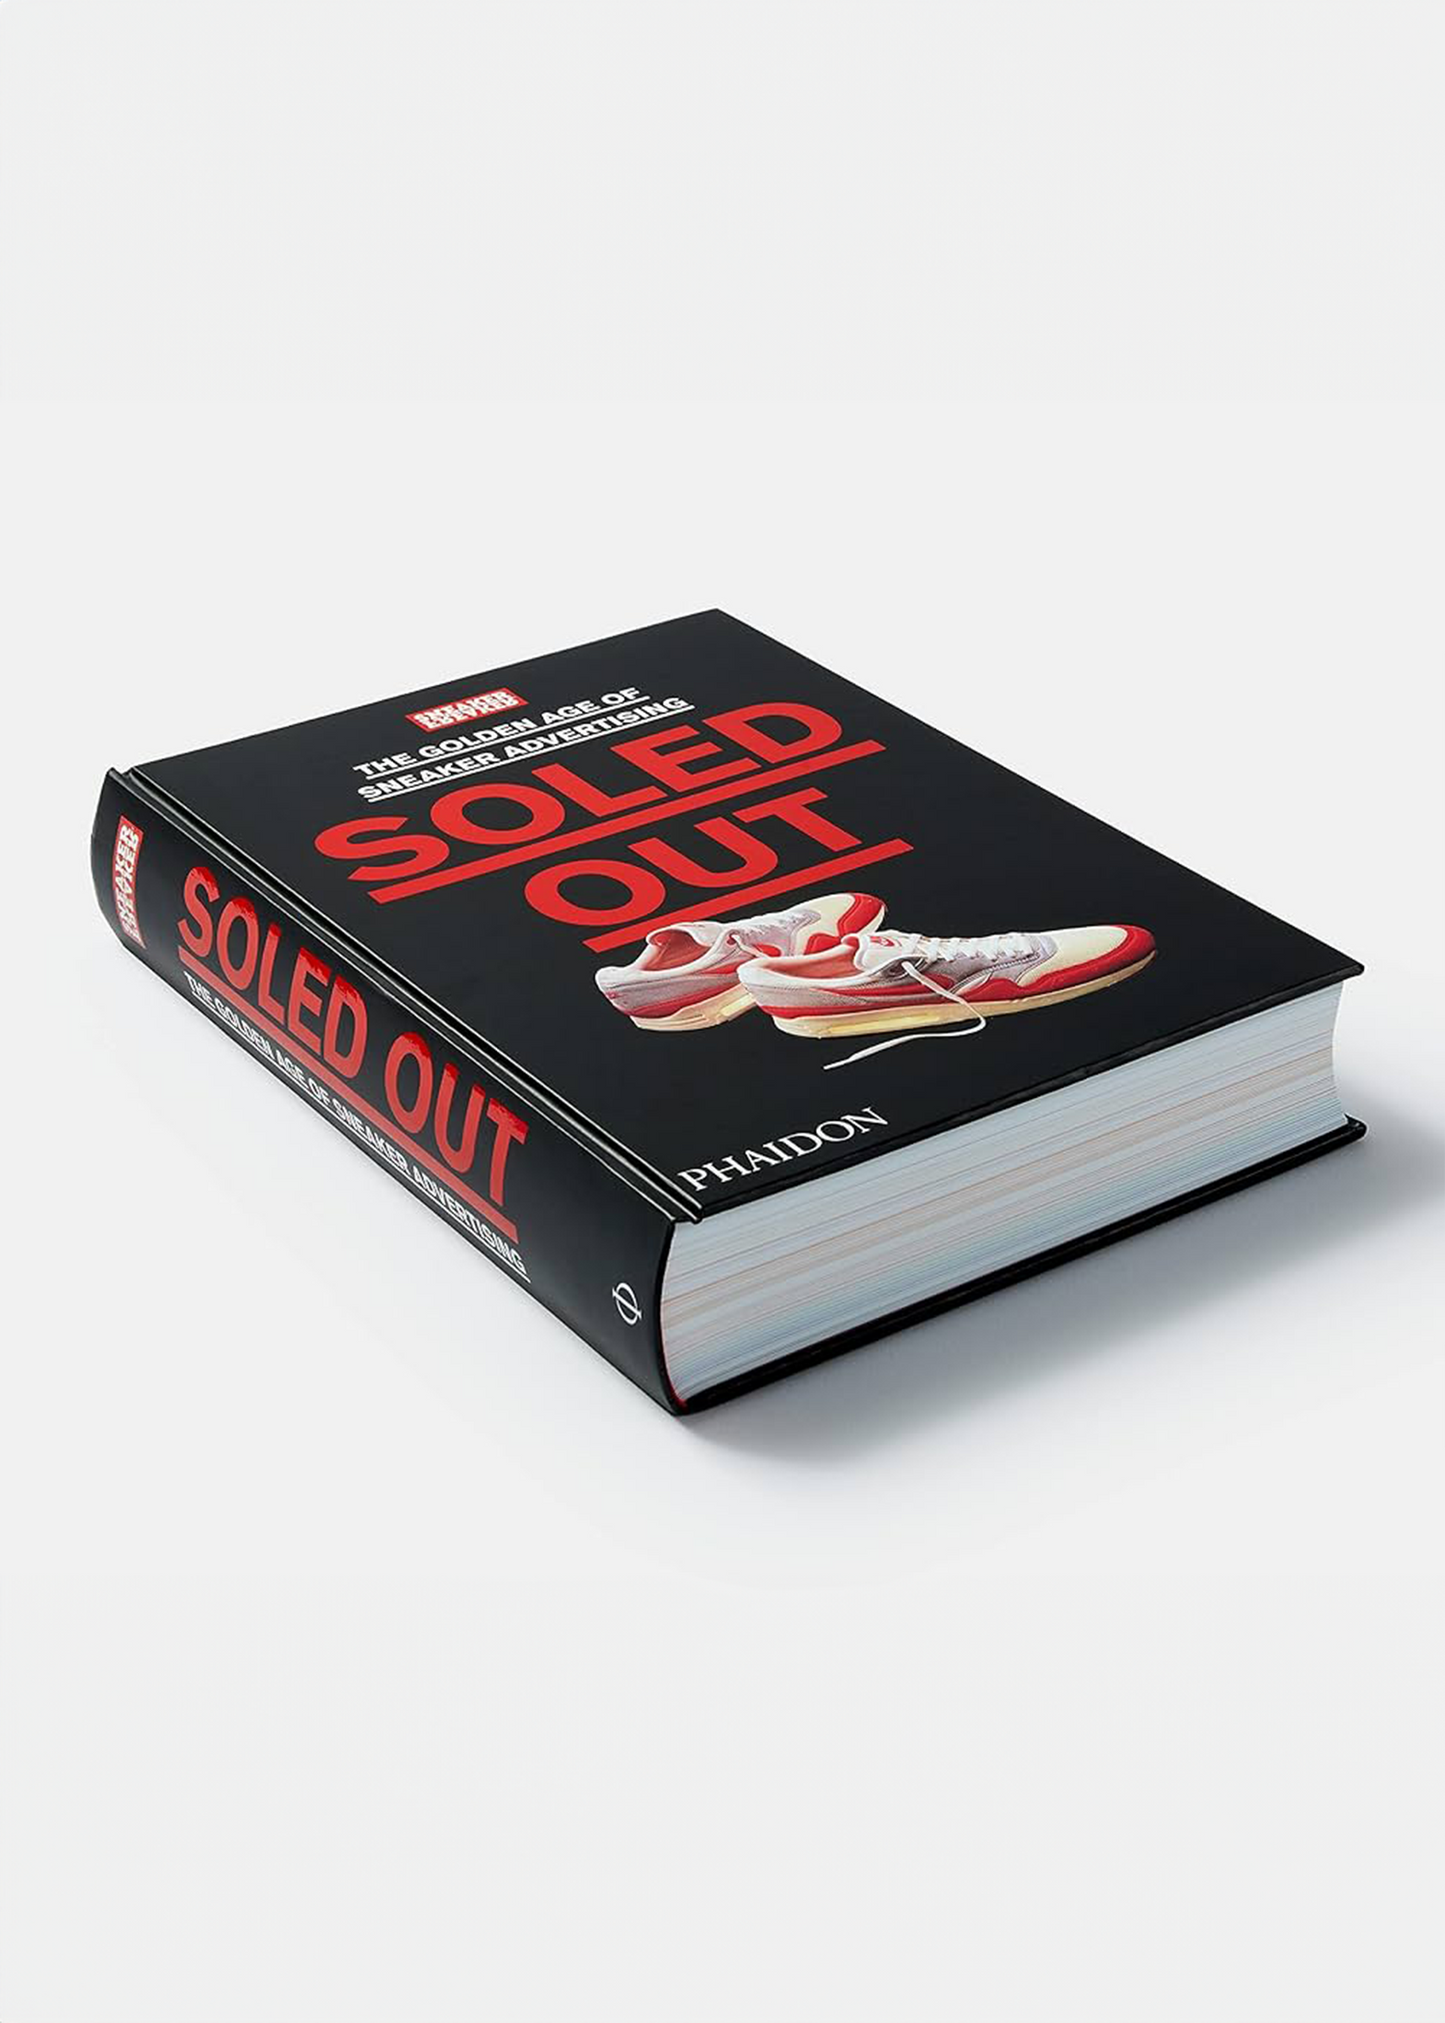 Phaidon  Soled Out : The Golden Age of Sneaker Advertising